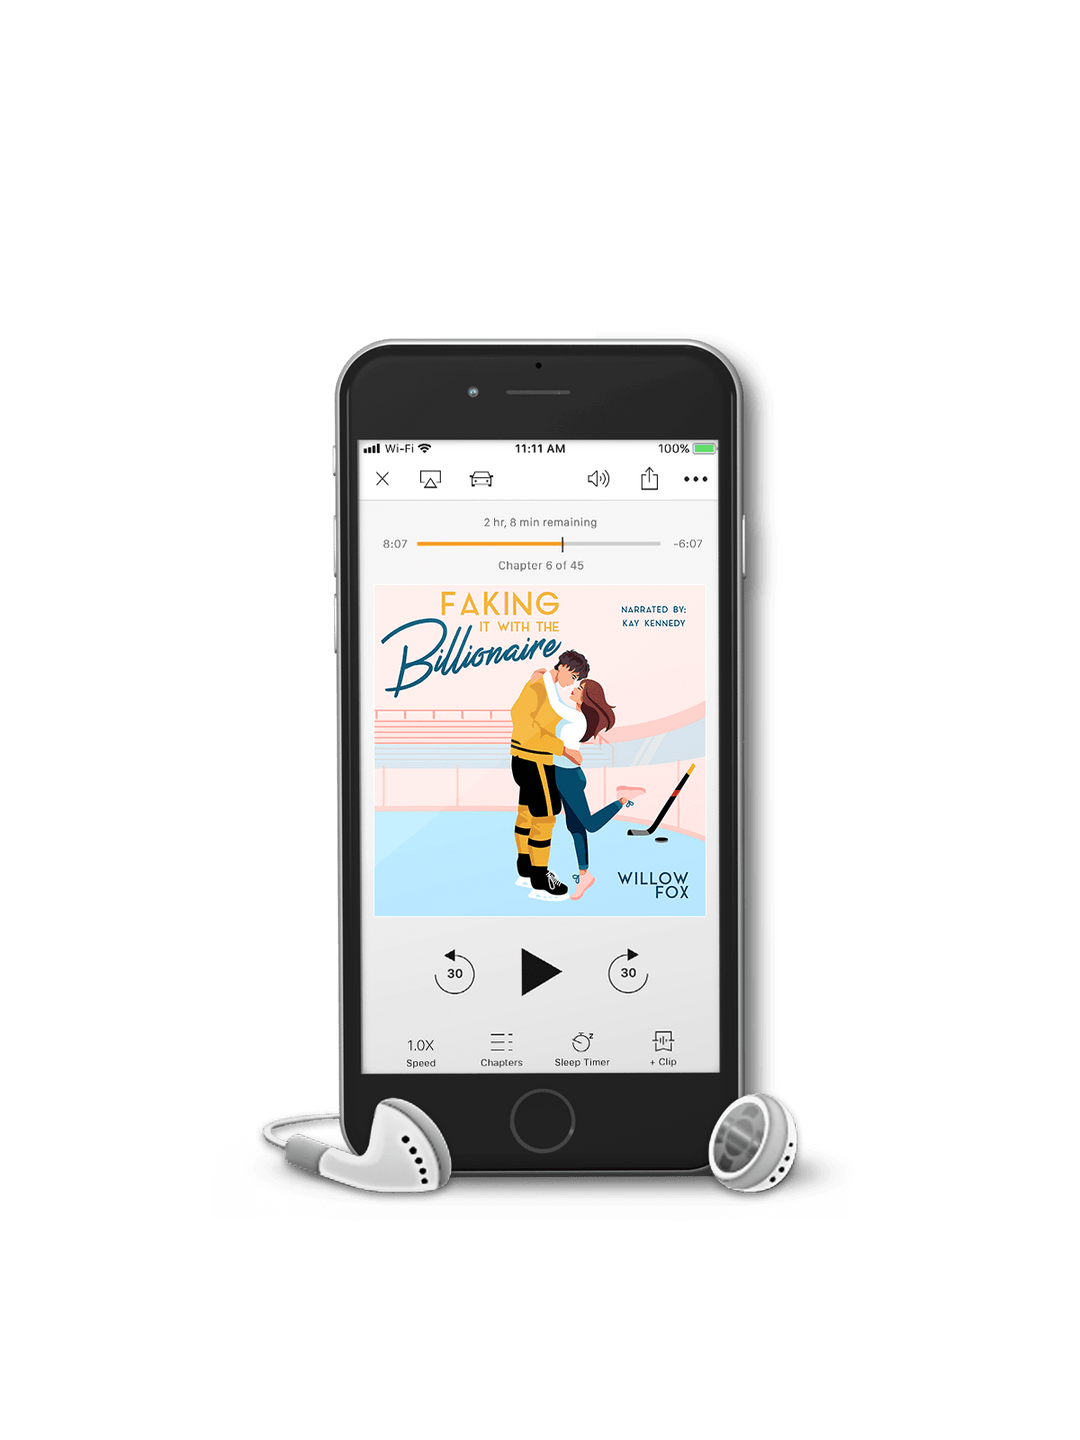 Author Willow Fox audiobooks audiobook Faking it with the Billionaire (audiobook)